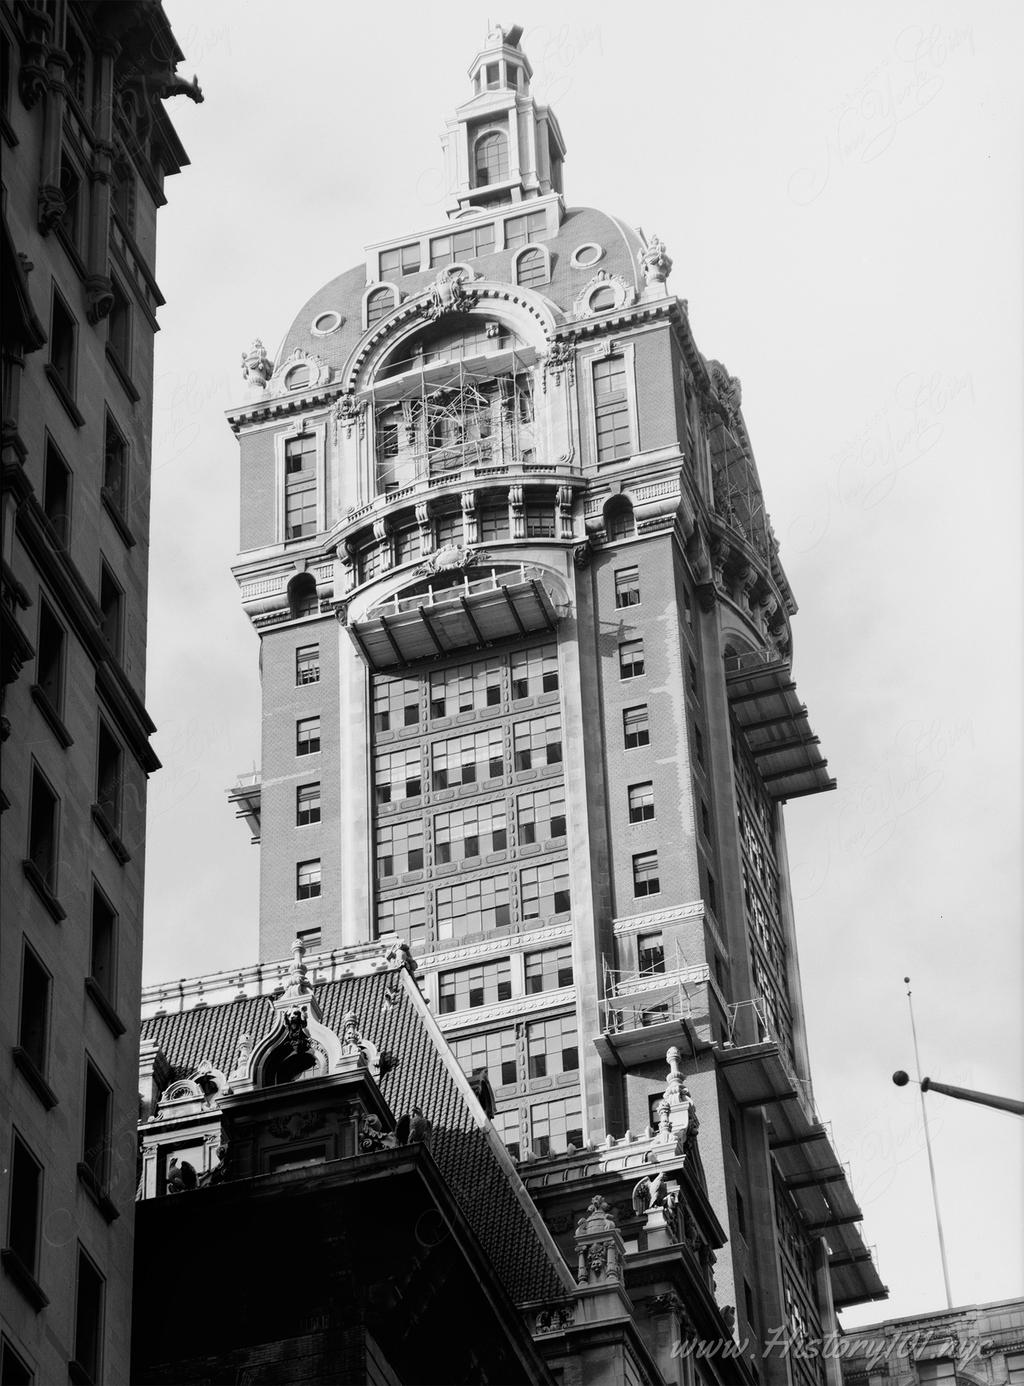 Photograph of the Singer Tower close up, taken from the west.